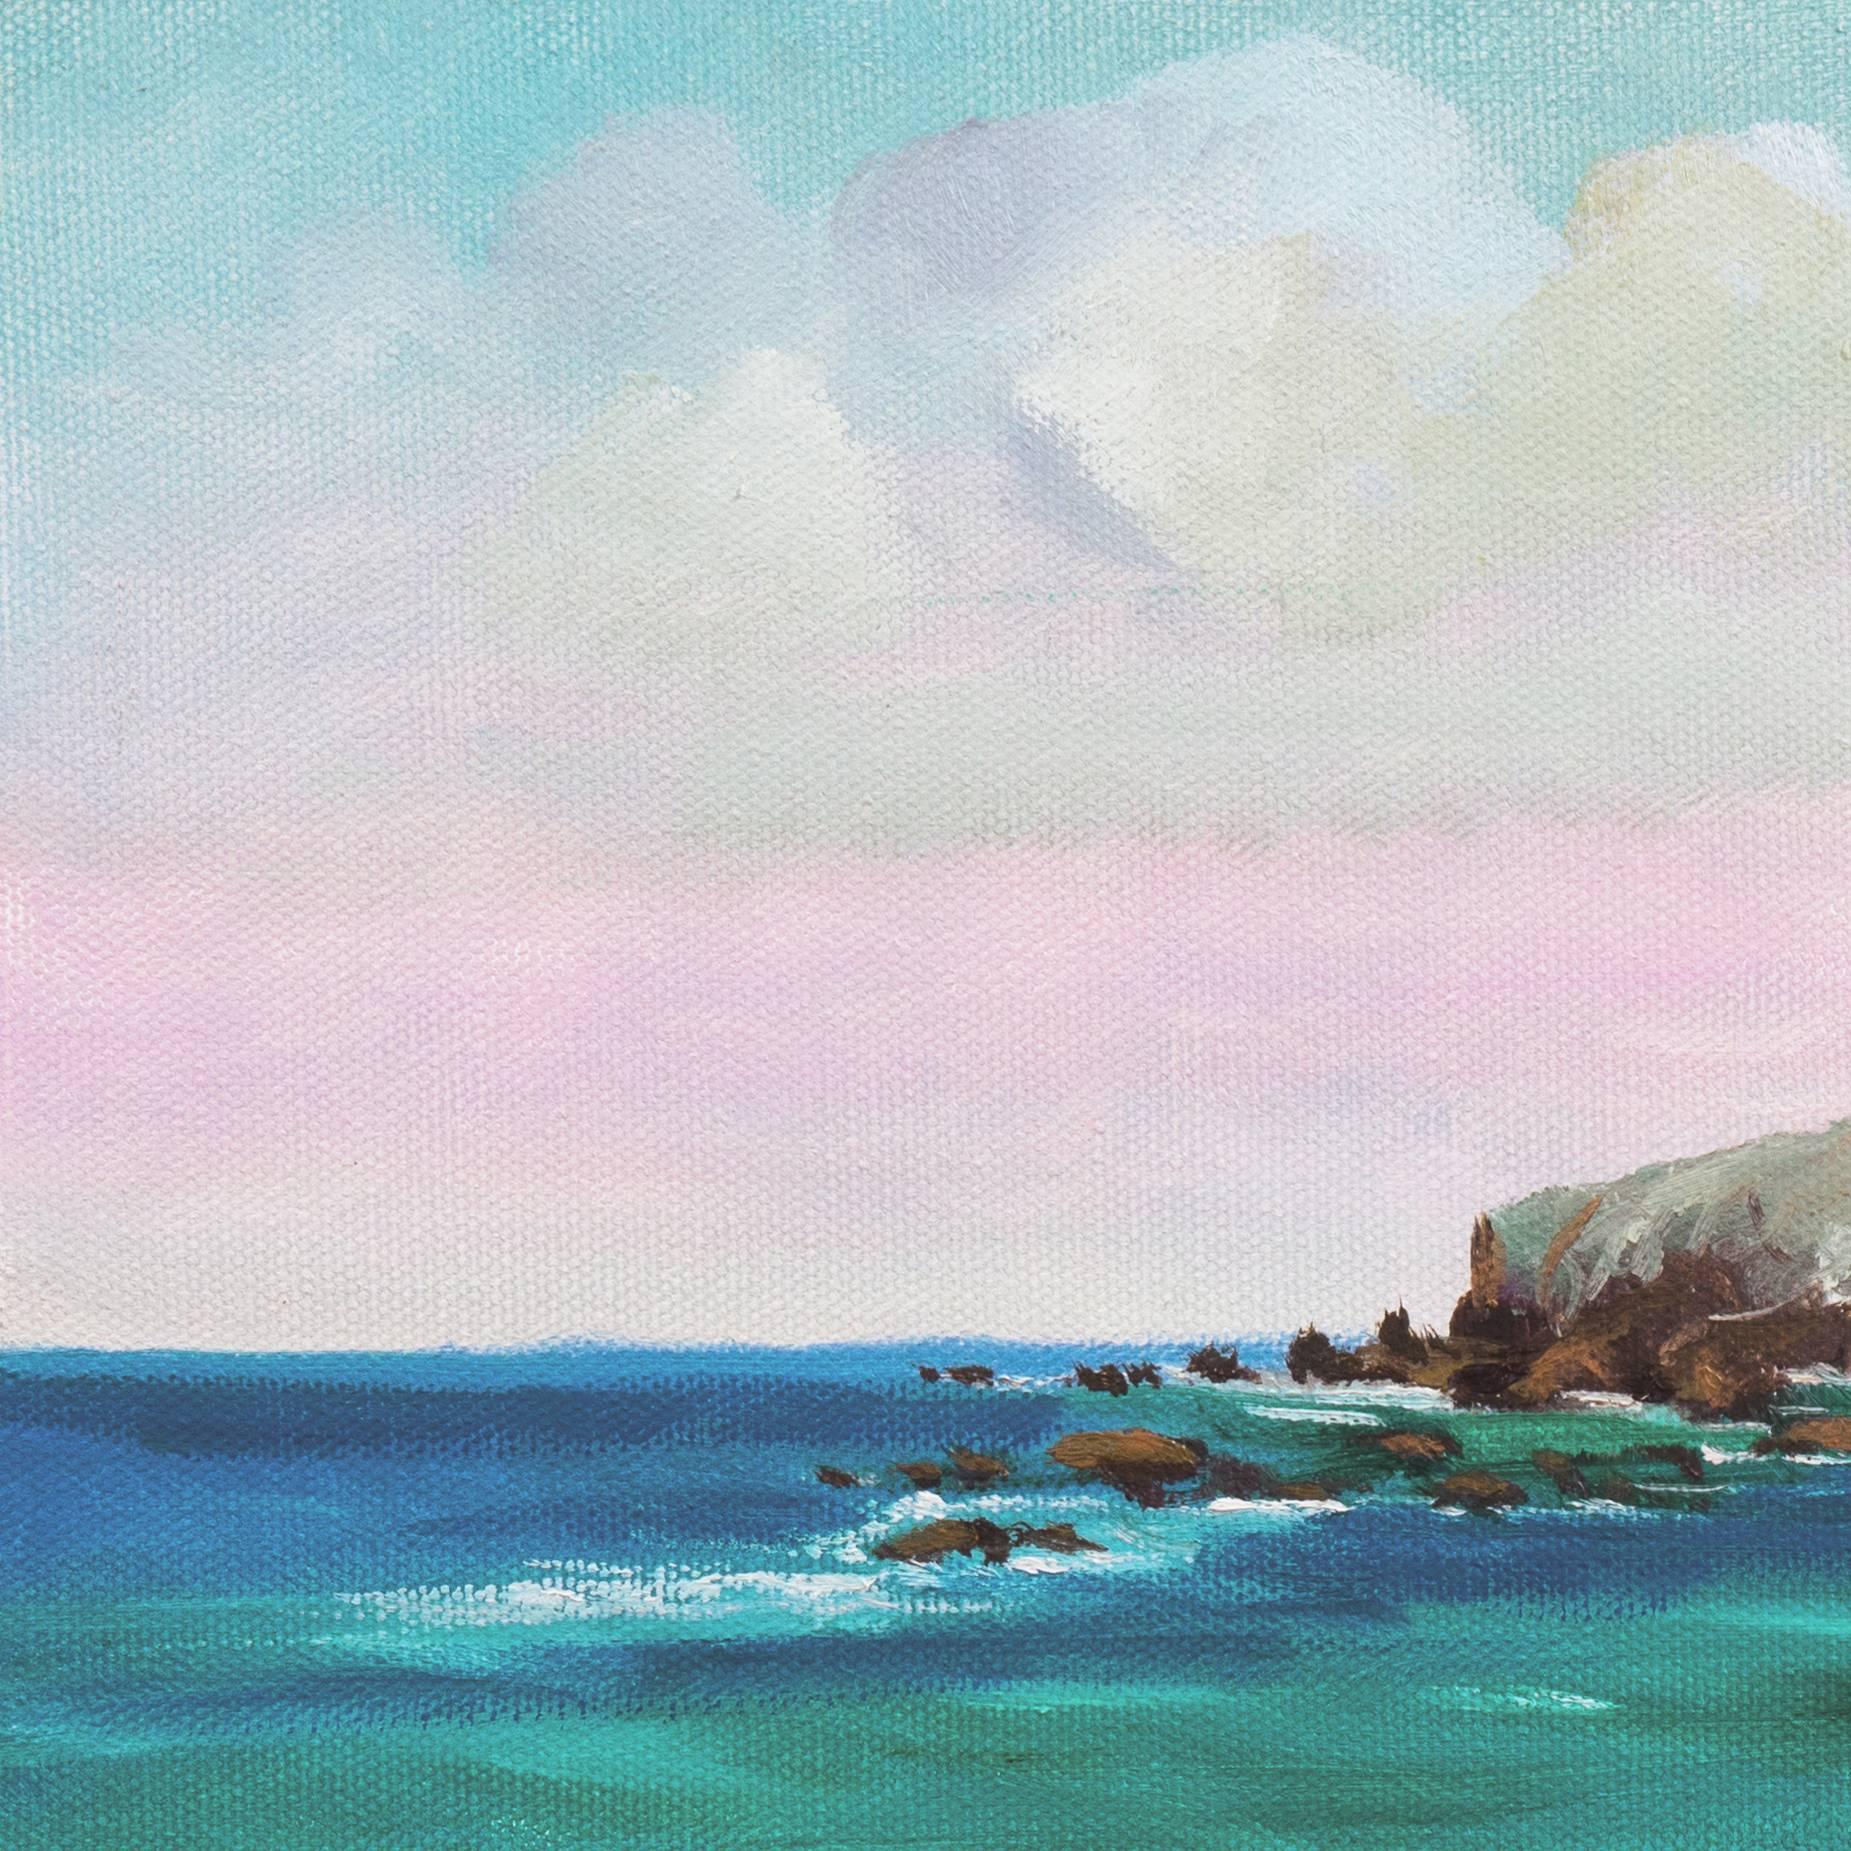 Signed lower right, 'Murray' and painted circa 2015.

A panoramic view of a hidden cove south of Carmel, California, with turquoise waters rolling in and the delicate sunset hues transforming the wet sand to lavender.

Born in Los Angeles, this